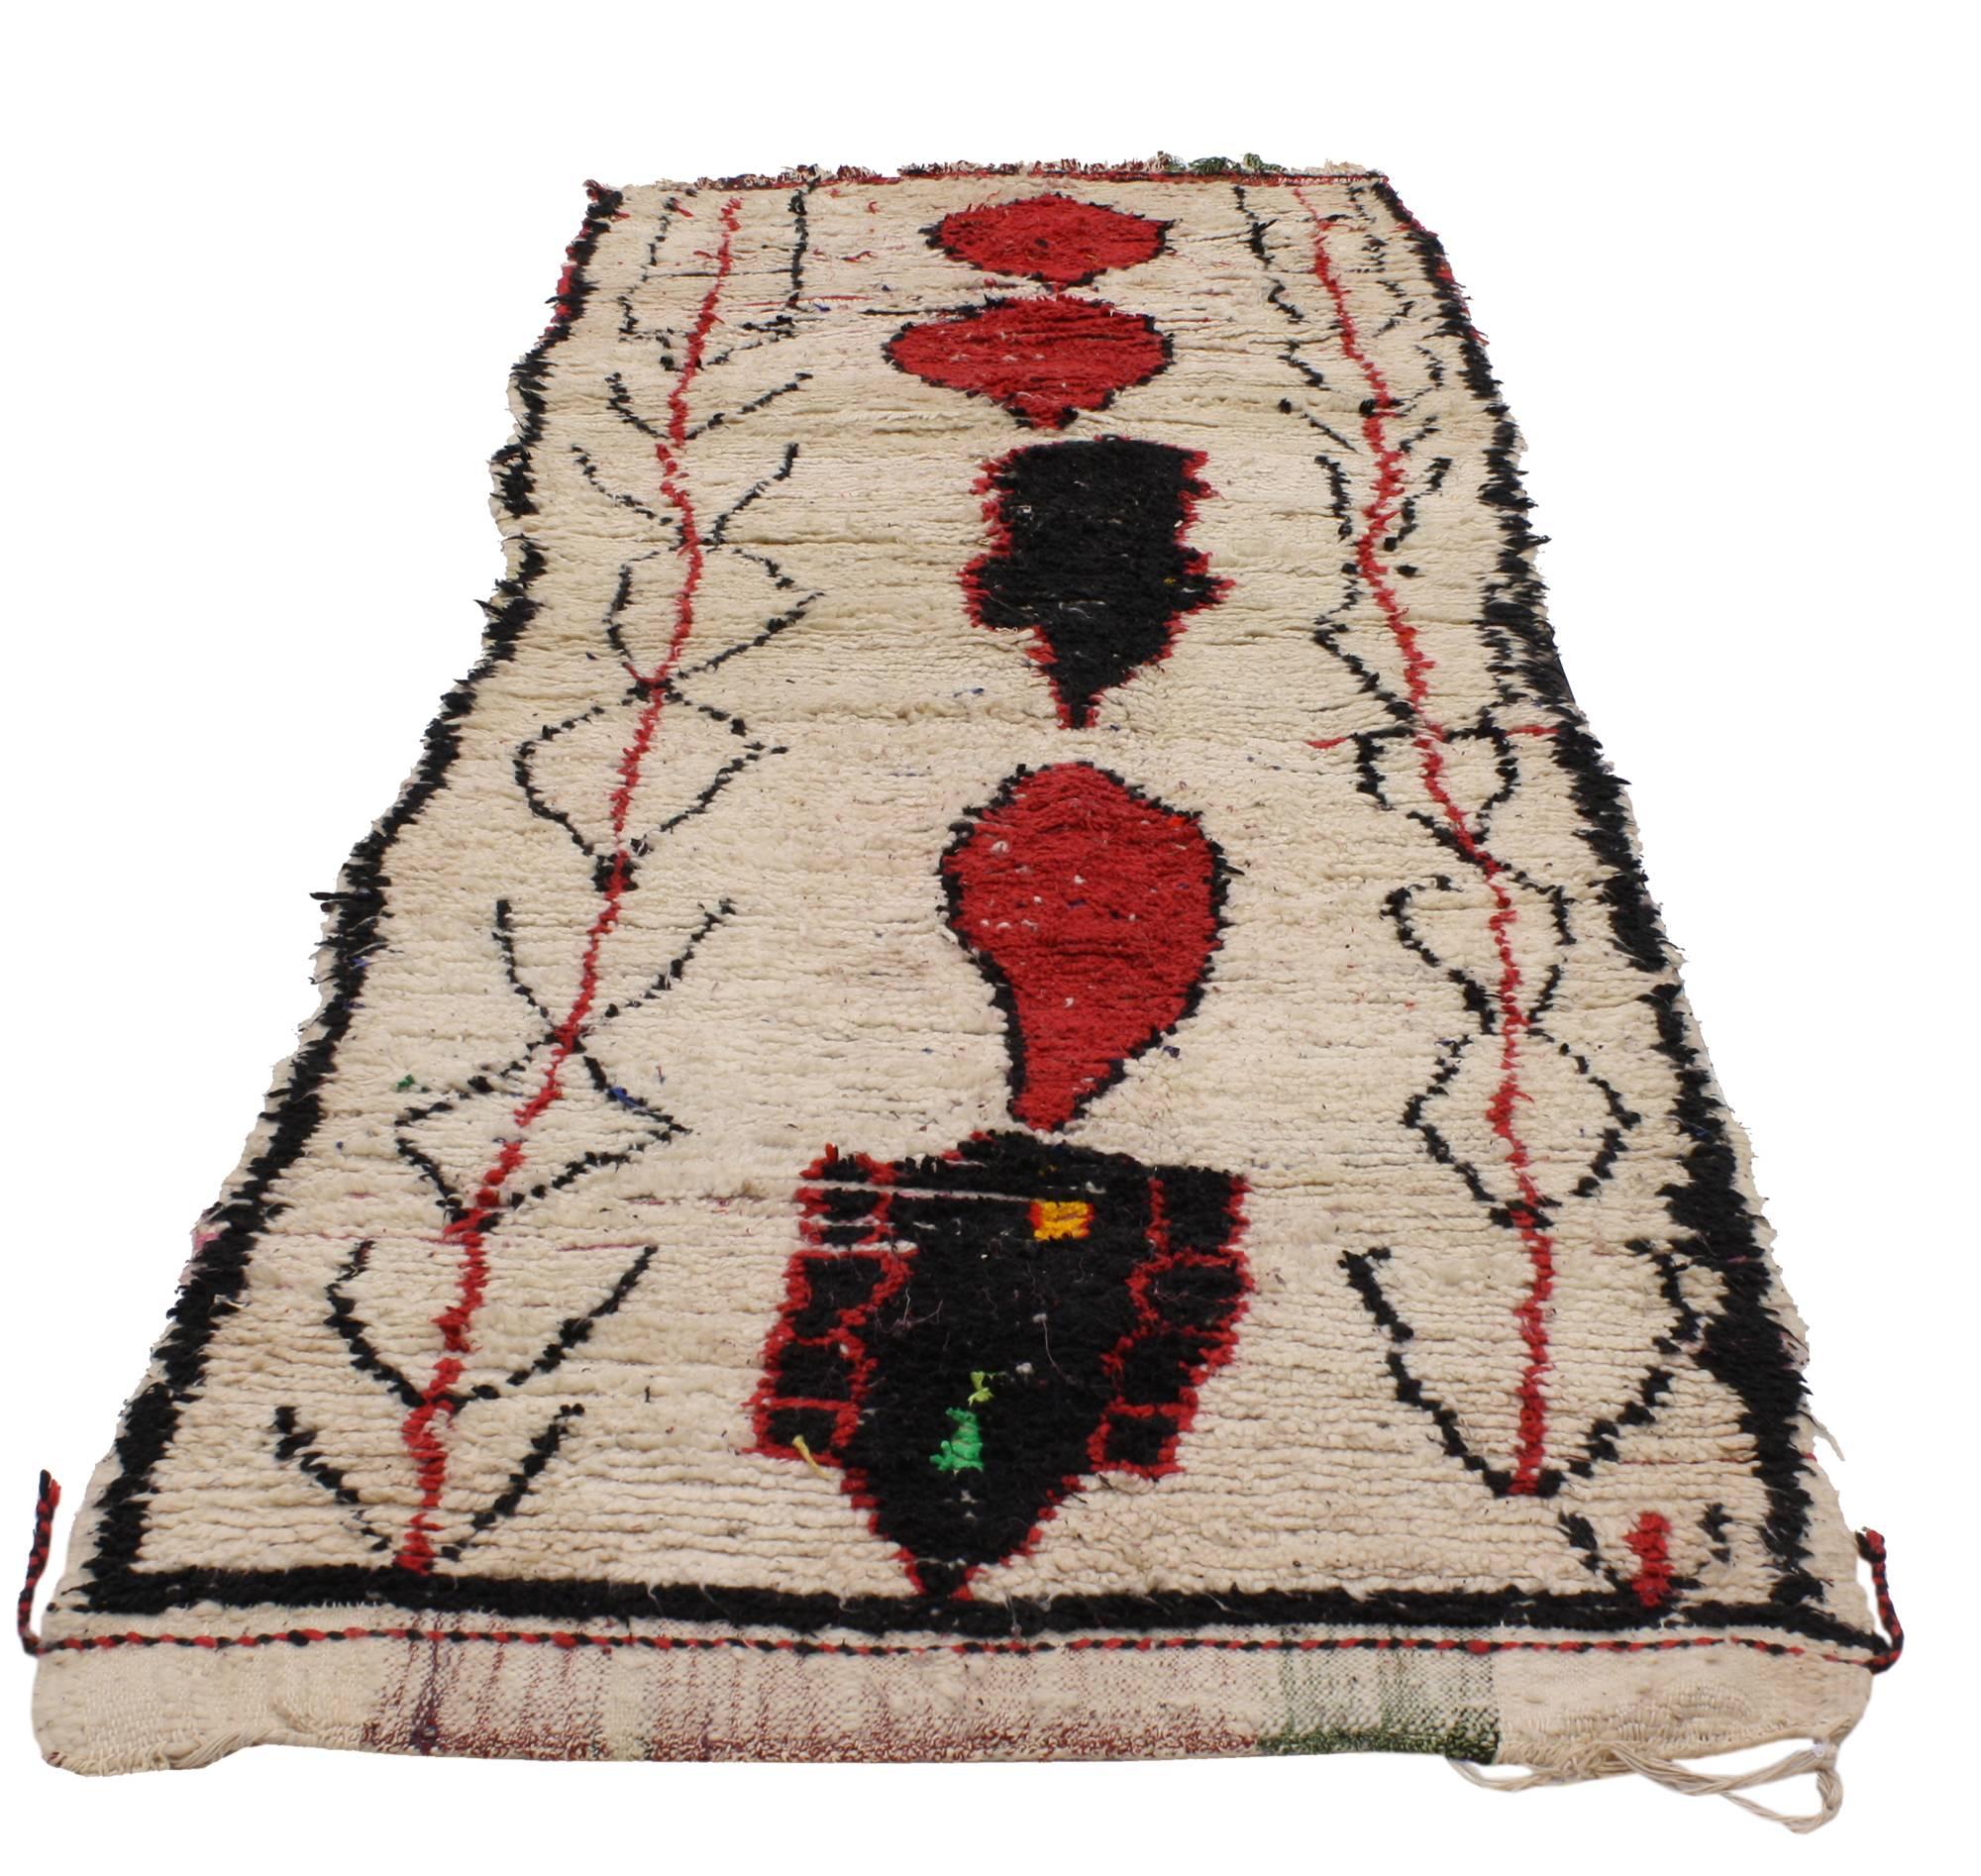 20372 Vintage Berber Moroccan Runner with Tribal Style, Shag Hallway Runner 03'07 x 09'06. The symbols presented over the beige background substantiates the significance of the patterns woven into this vintage Berber Moroccan carpet runner. Without